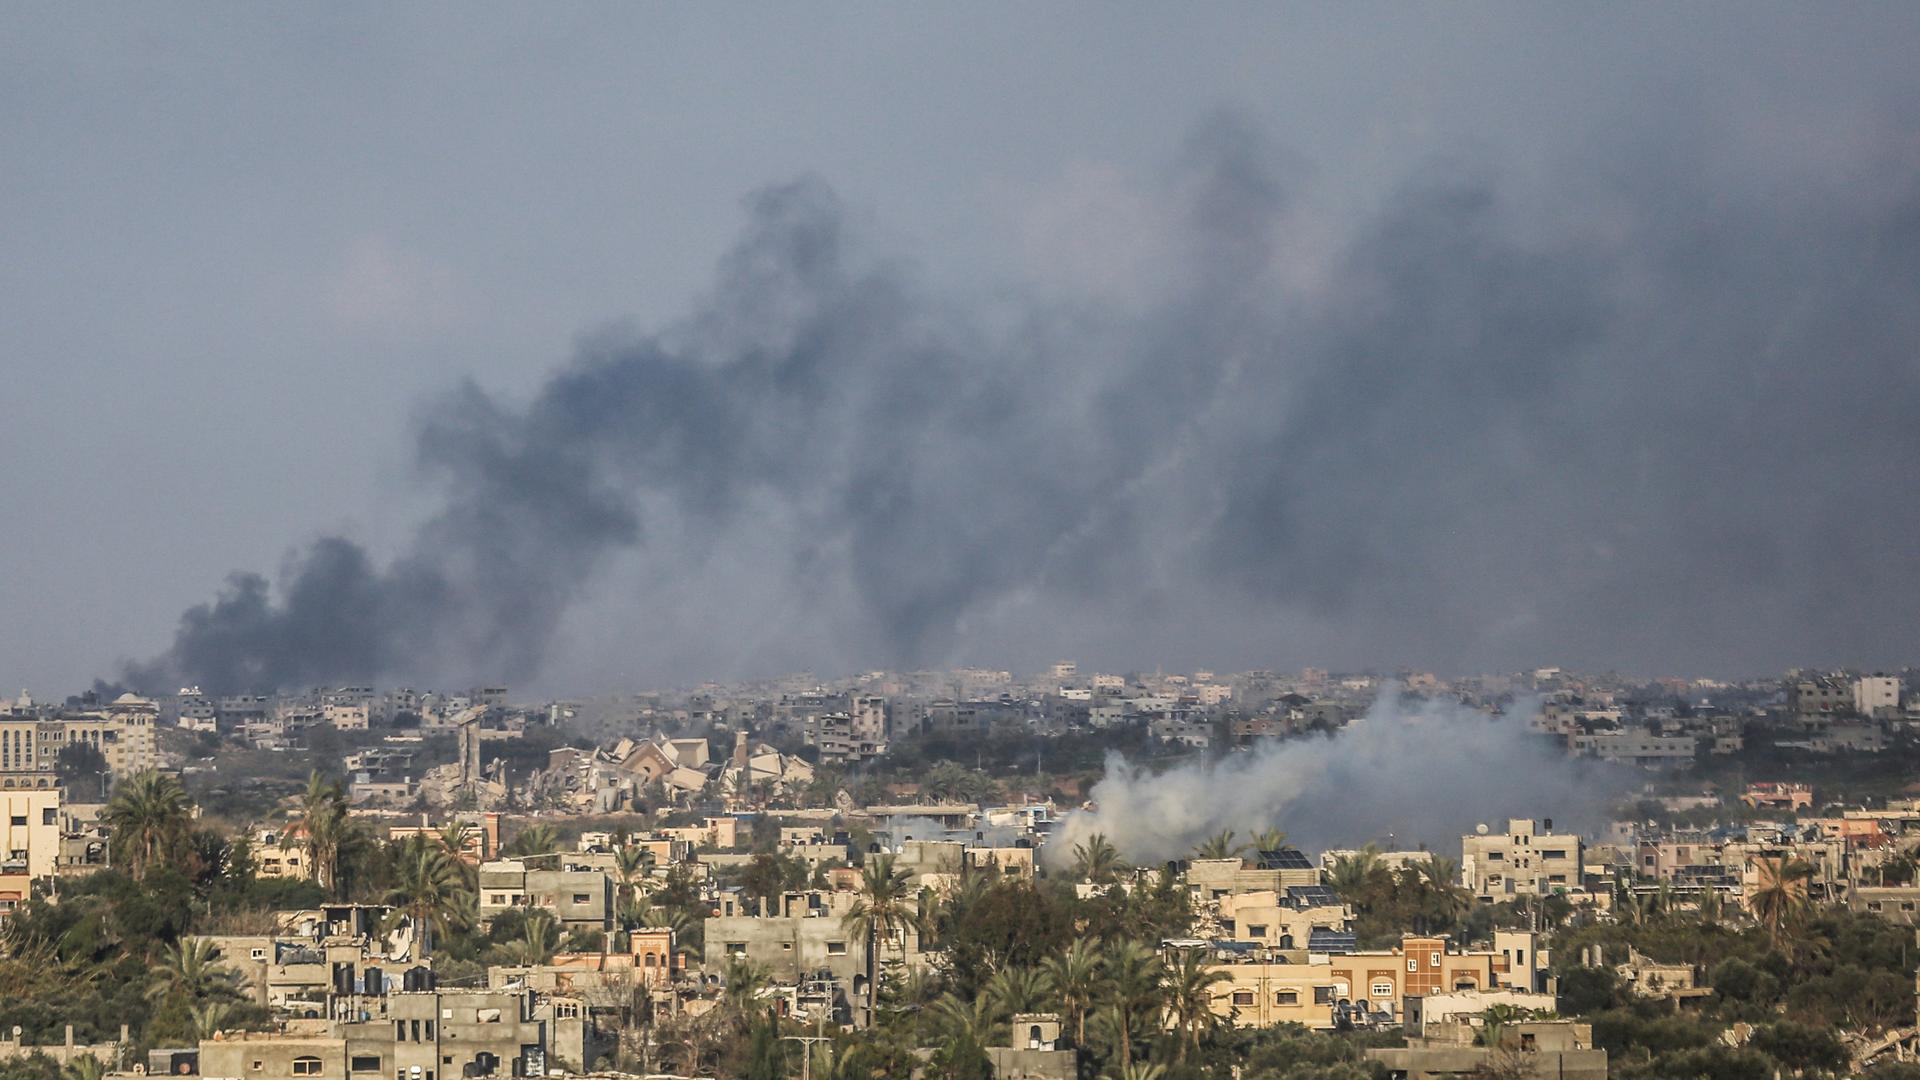 Thick smoke can be seen above the buildings of Gaza City as a result of the continuing attacks on the Al-Zaytoun neighborhood, amid the ongoing battles between Israel and the Palestinian Islamist Hamas movement.